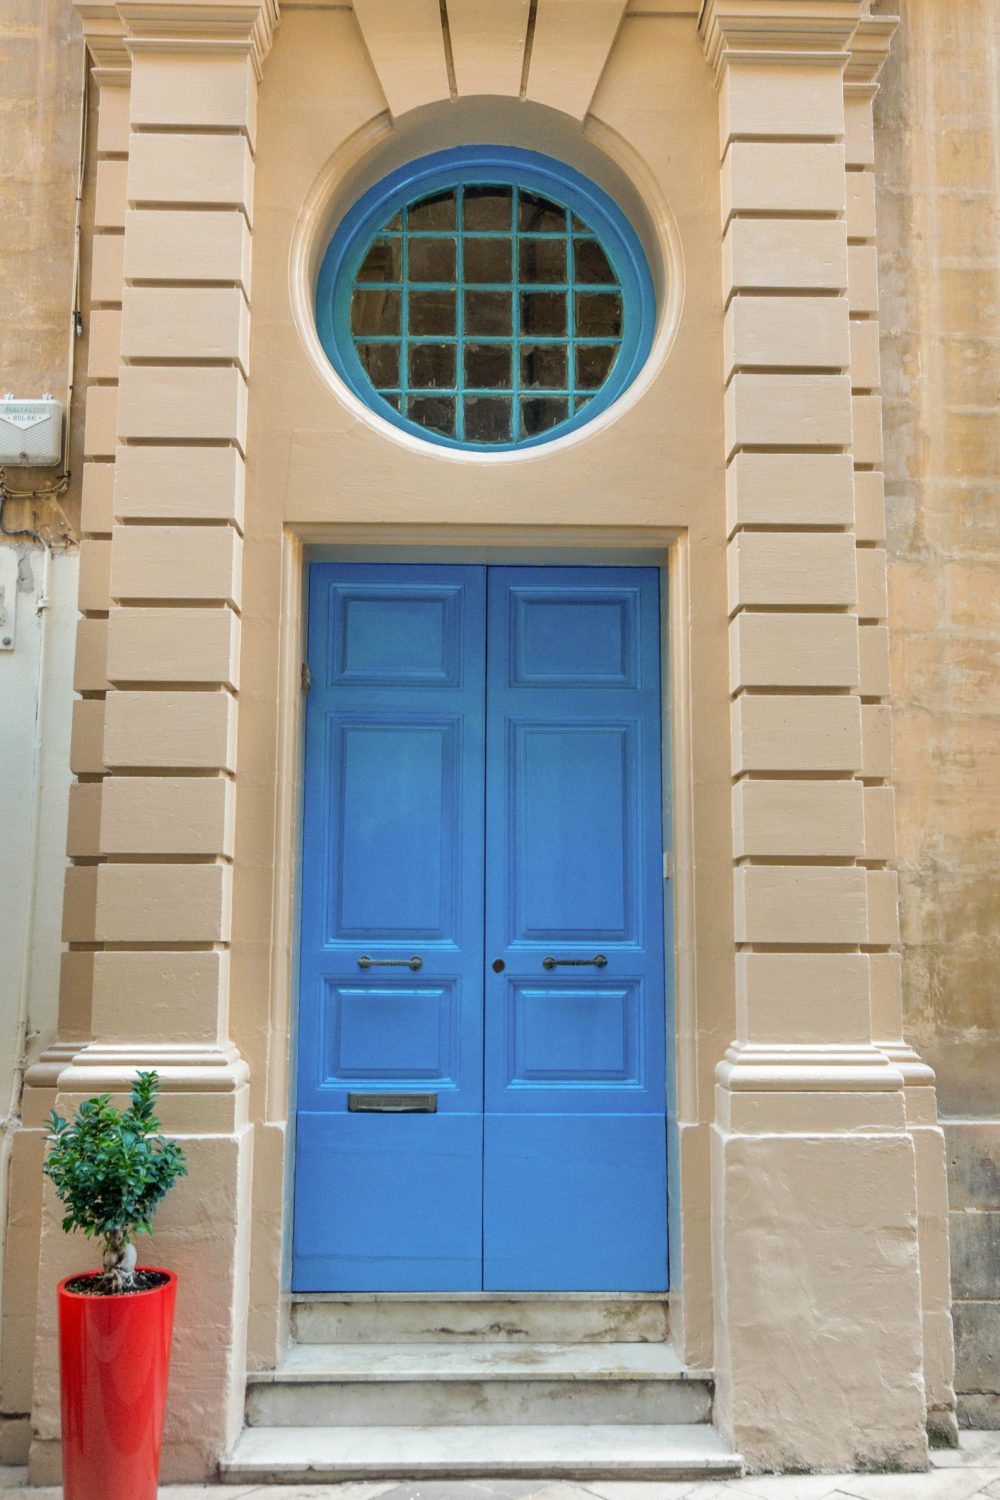 Things to do in Valletta